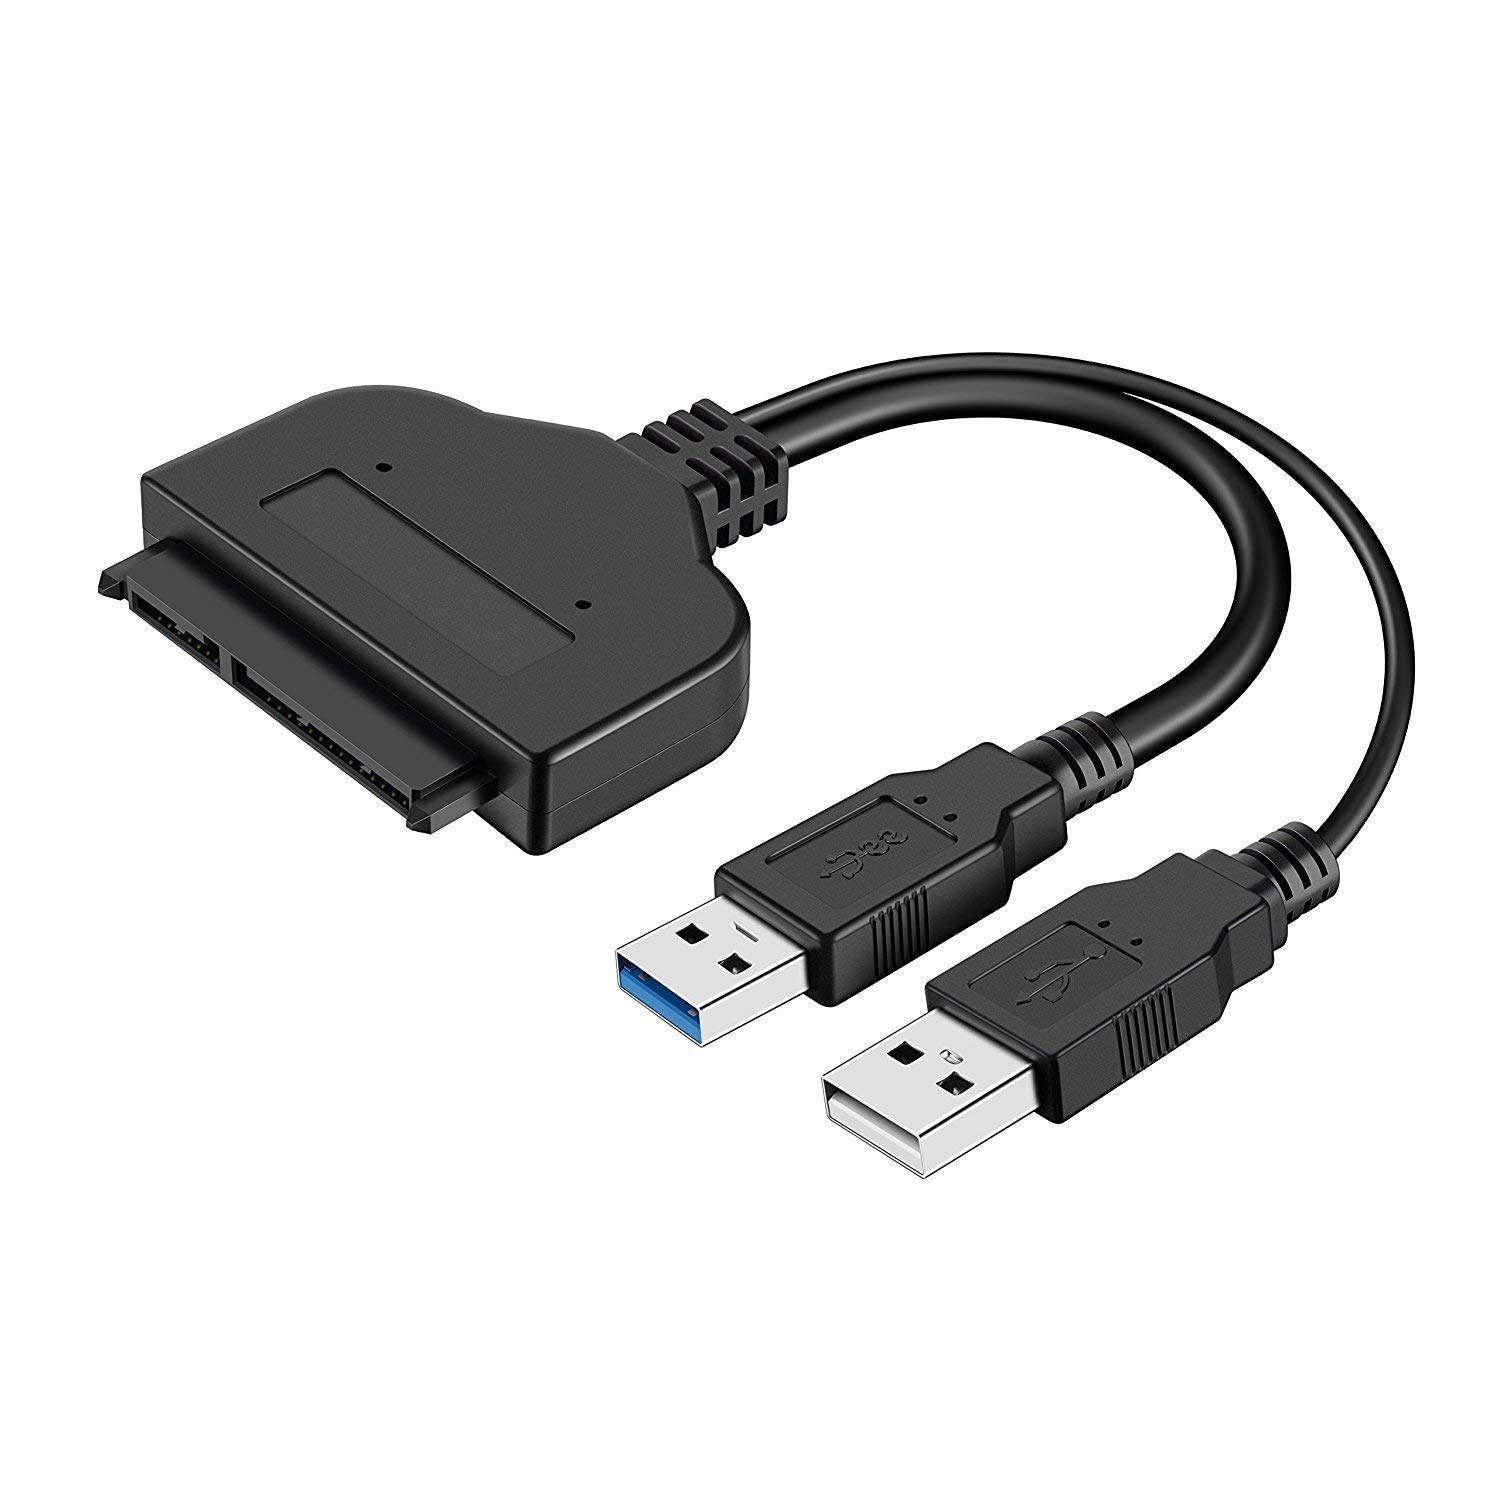 USB 3.0 To SATA 22-Pin 2.5 inch HDD Adapter USB Power Cable - Mining Wholesale